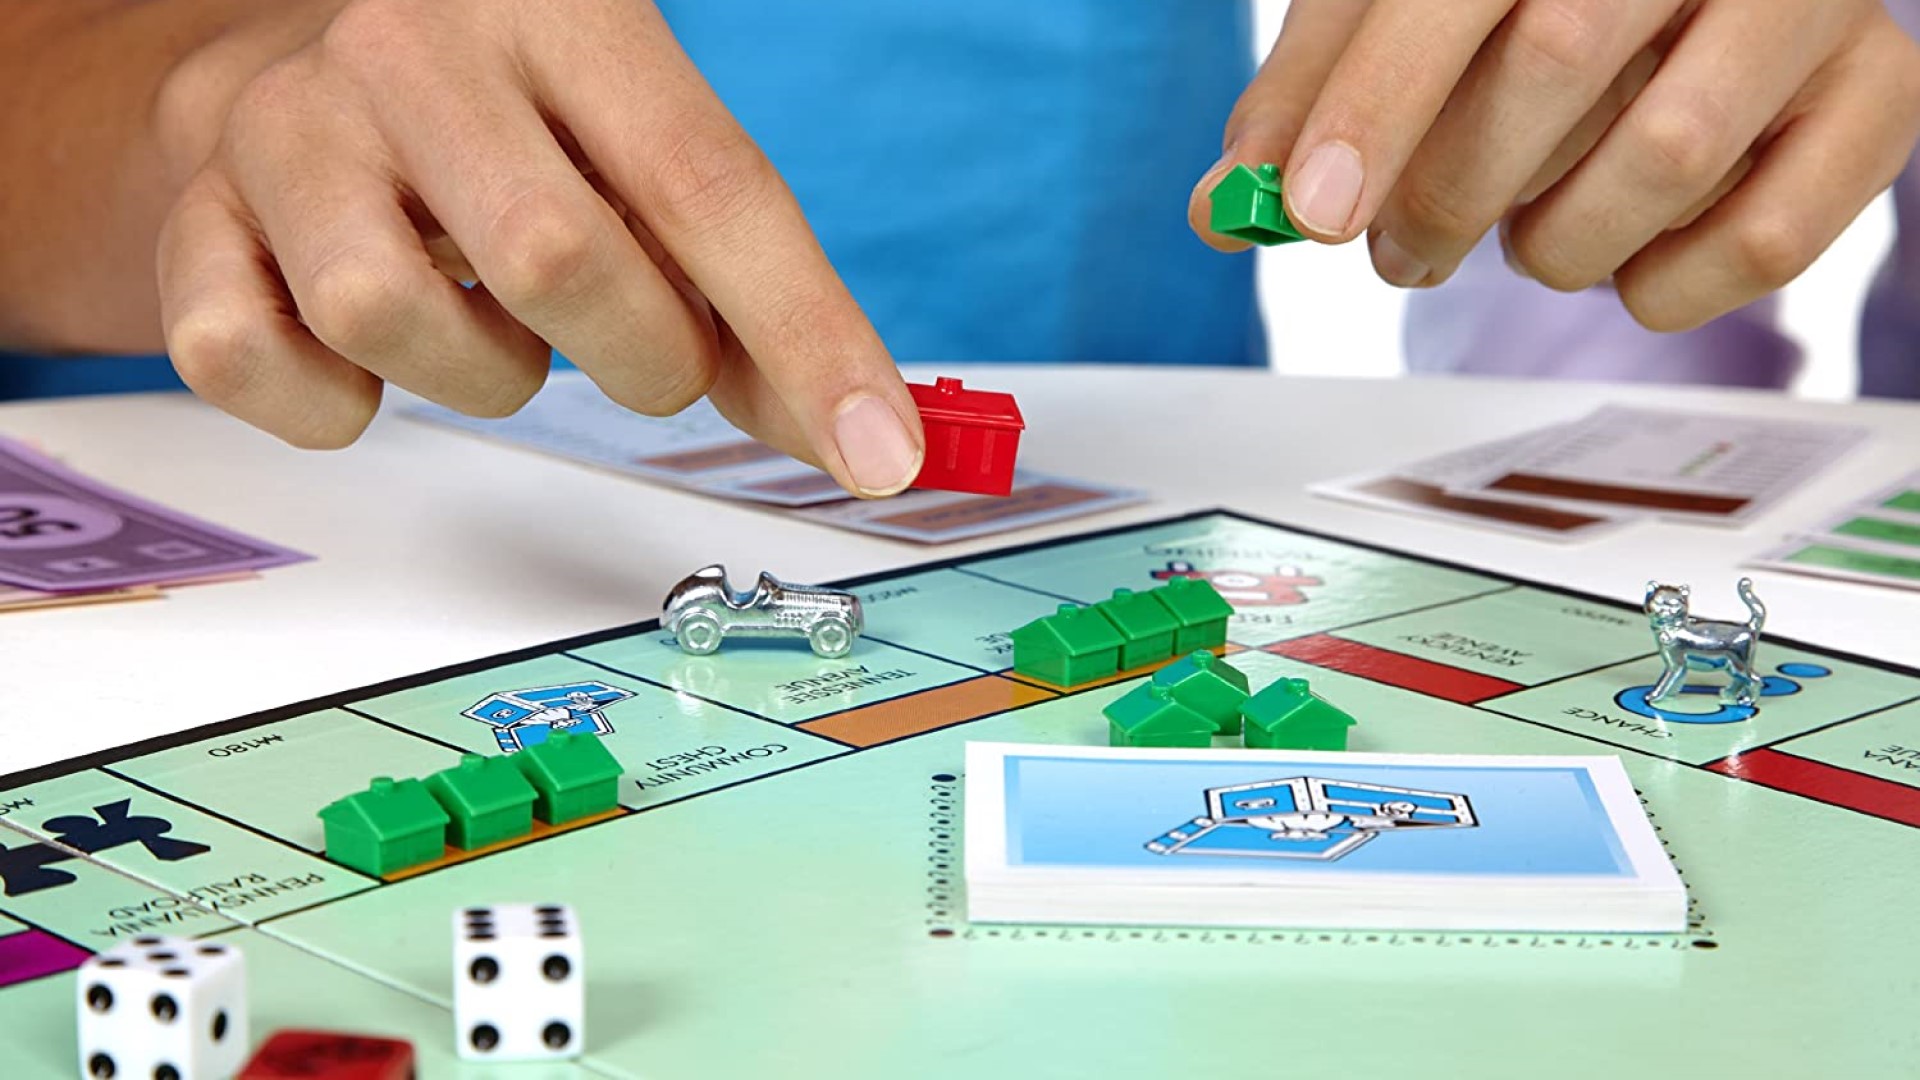 Monopoly - players placing houses and hotels onto a monopoly board